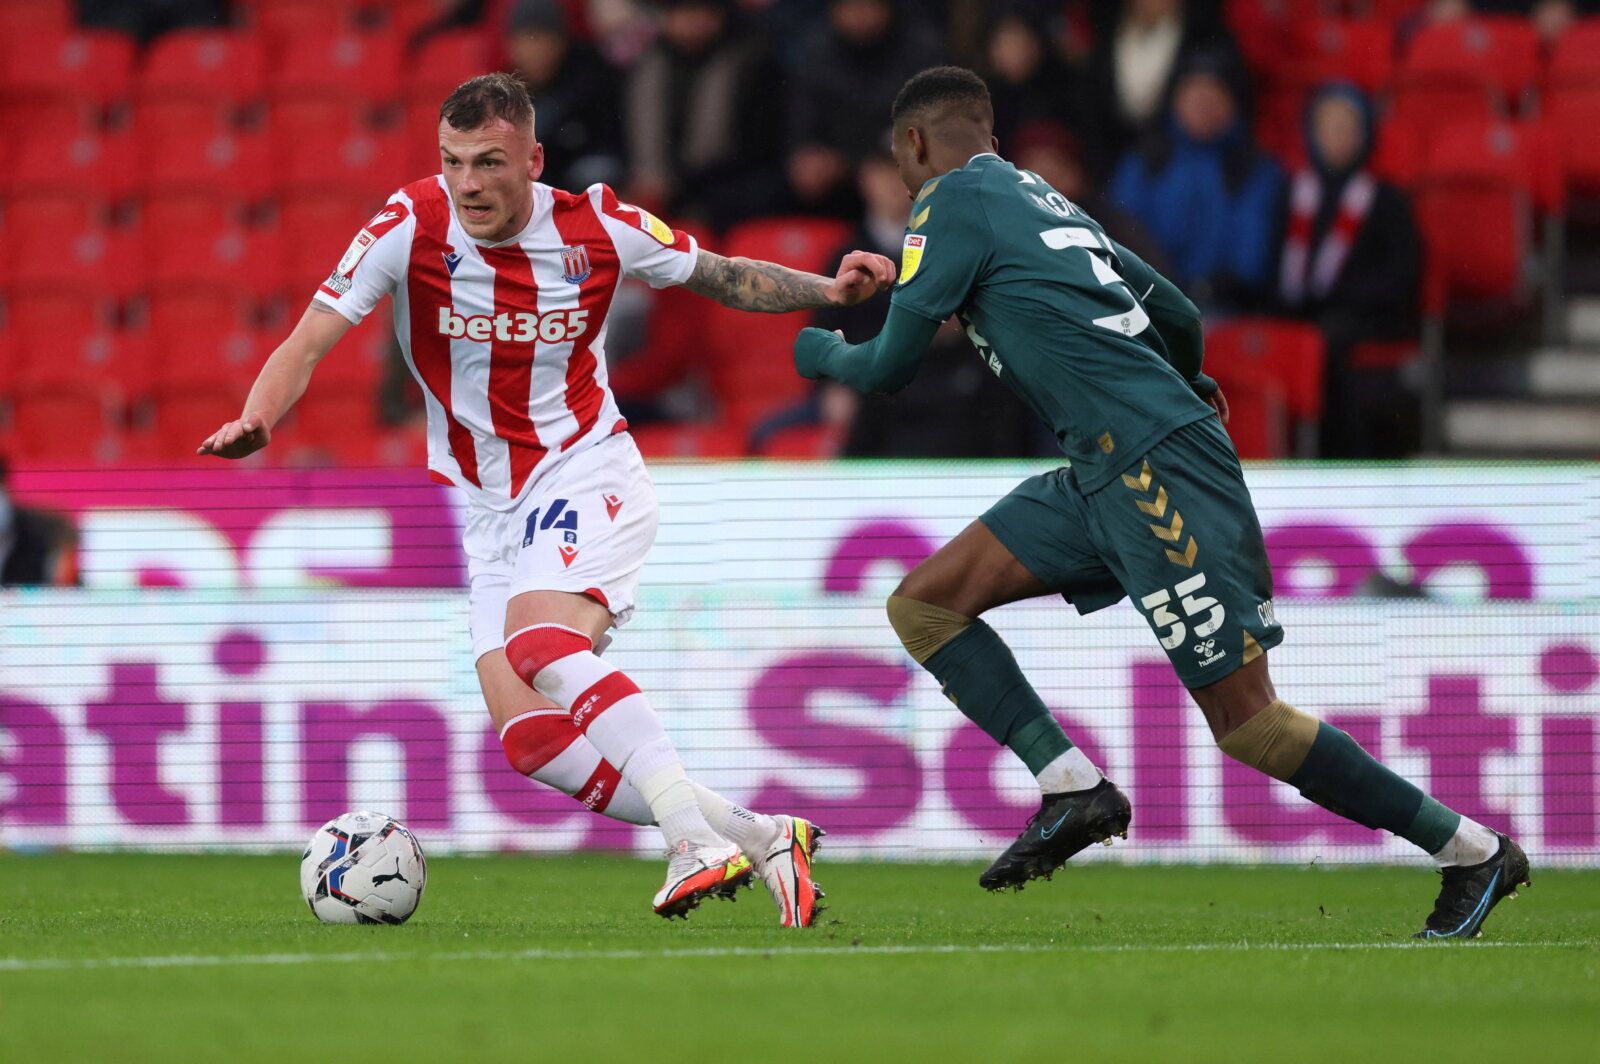 Soccer Football - Championship - Stoke City v Middlesbrough - bet365 Stadium, Stoke-on-Trent, Britain - December 11, 2021  Stoke City's Josh Tymon in action with Middlesbrough's Isaiah Jones  Action Images/John Clifton  EDITORIAL USE ONLY. No use with unauthorized audio, video, data, fixture lists, club/league logos or "live" services. Online in-match use limited to 75 images, no video emulation. No use in betting, games or single club/league/player publications.  Please contact your account rep